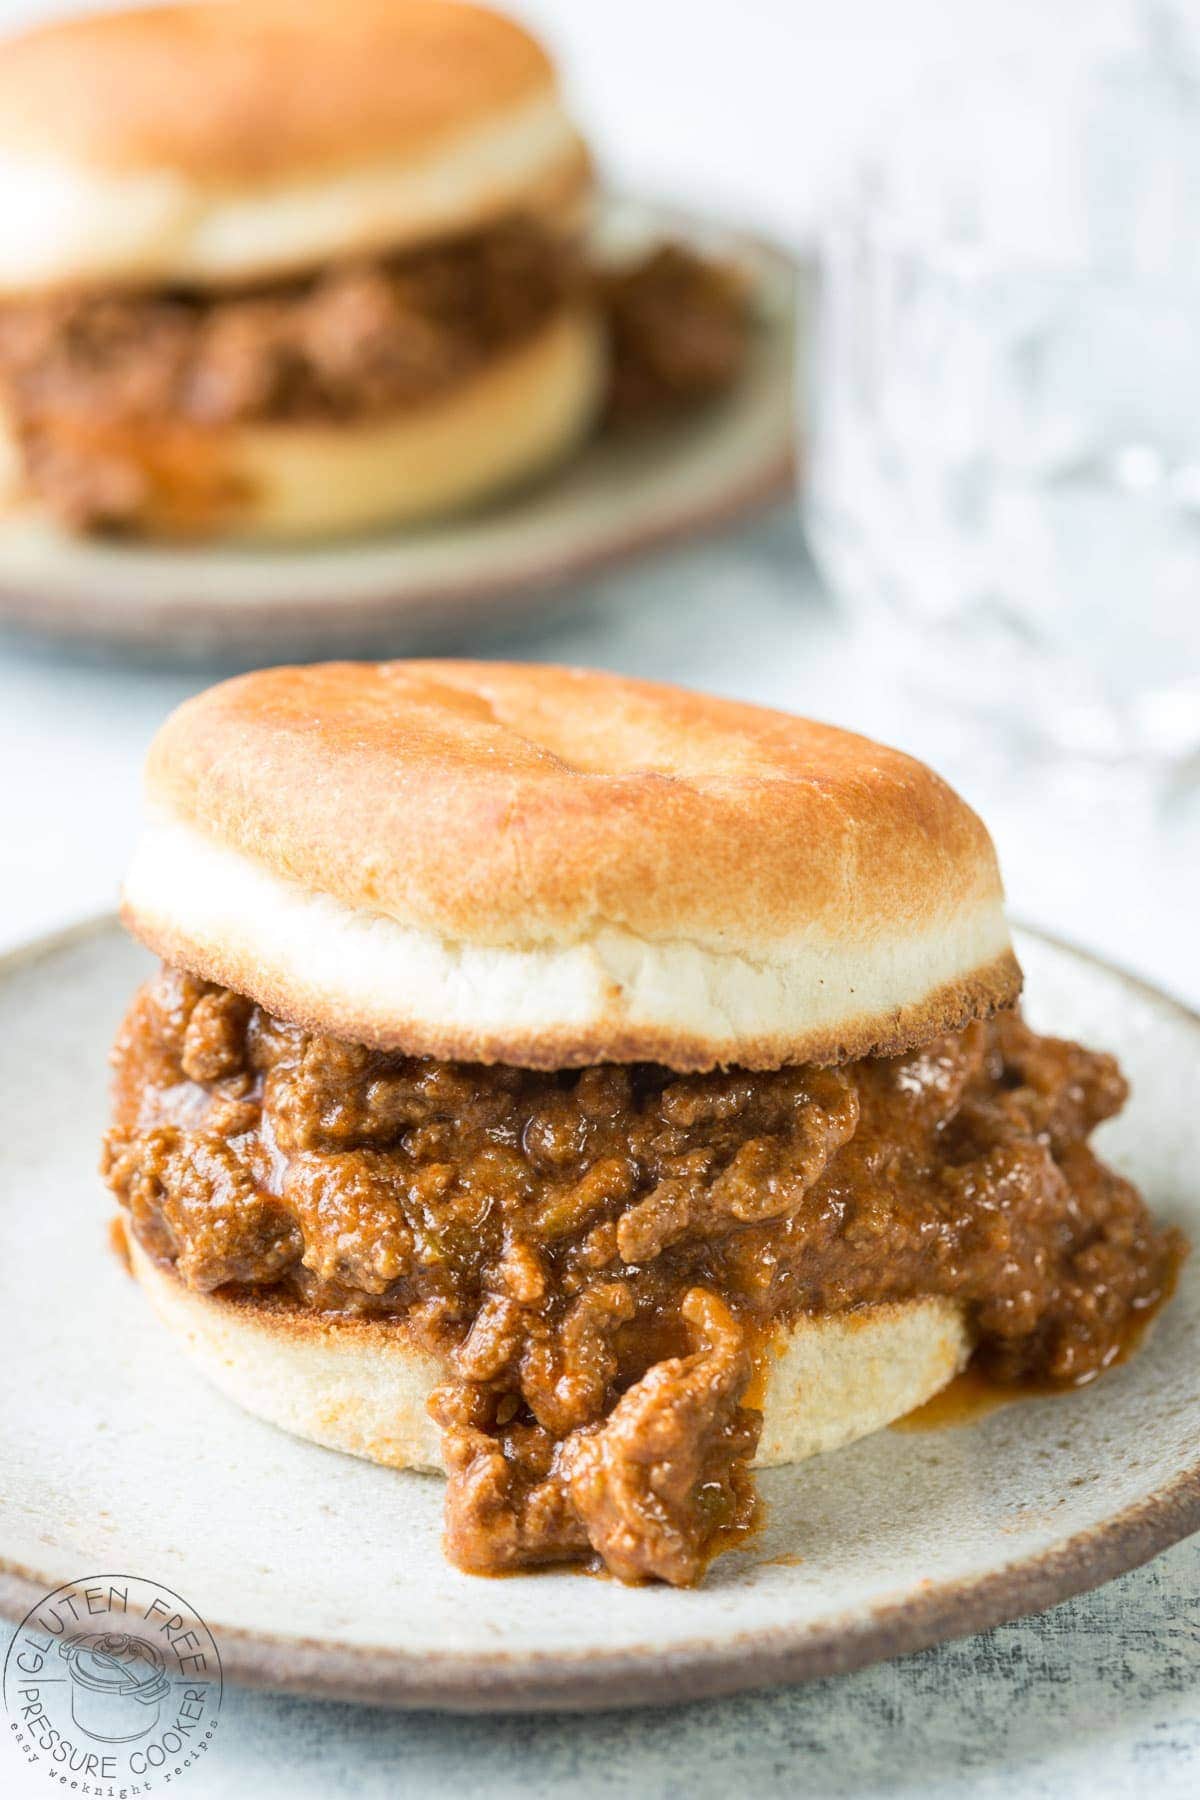 Best Instant Pot Sloppy Joes recipe with ground beef sauce